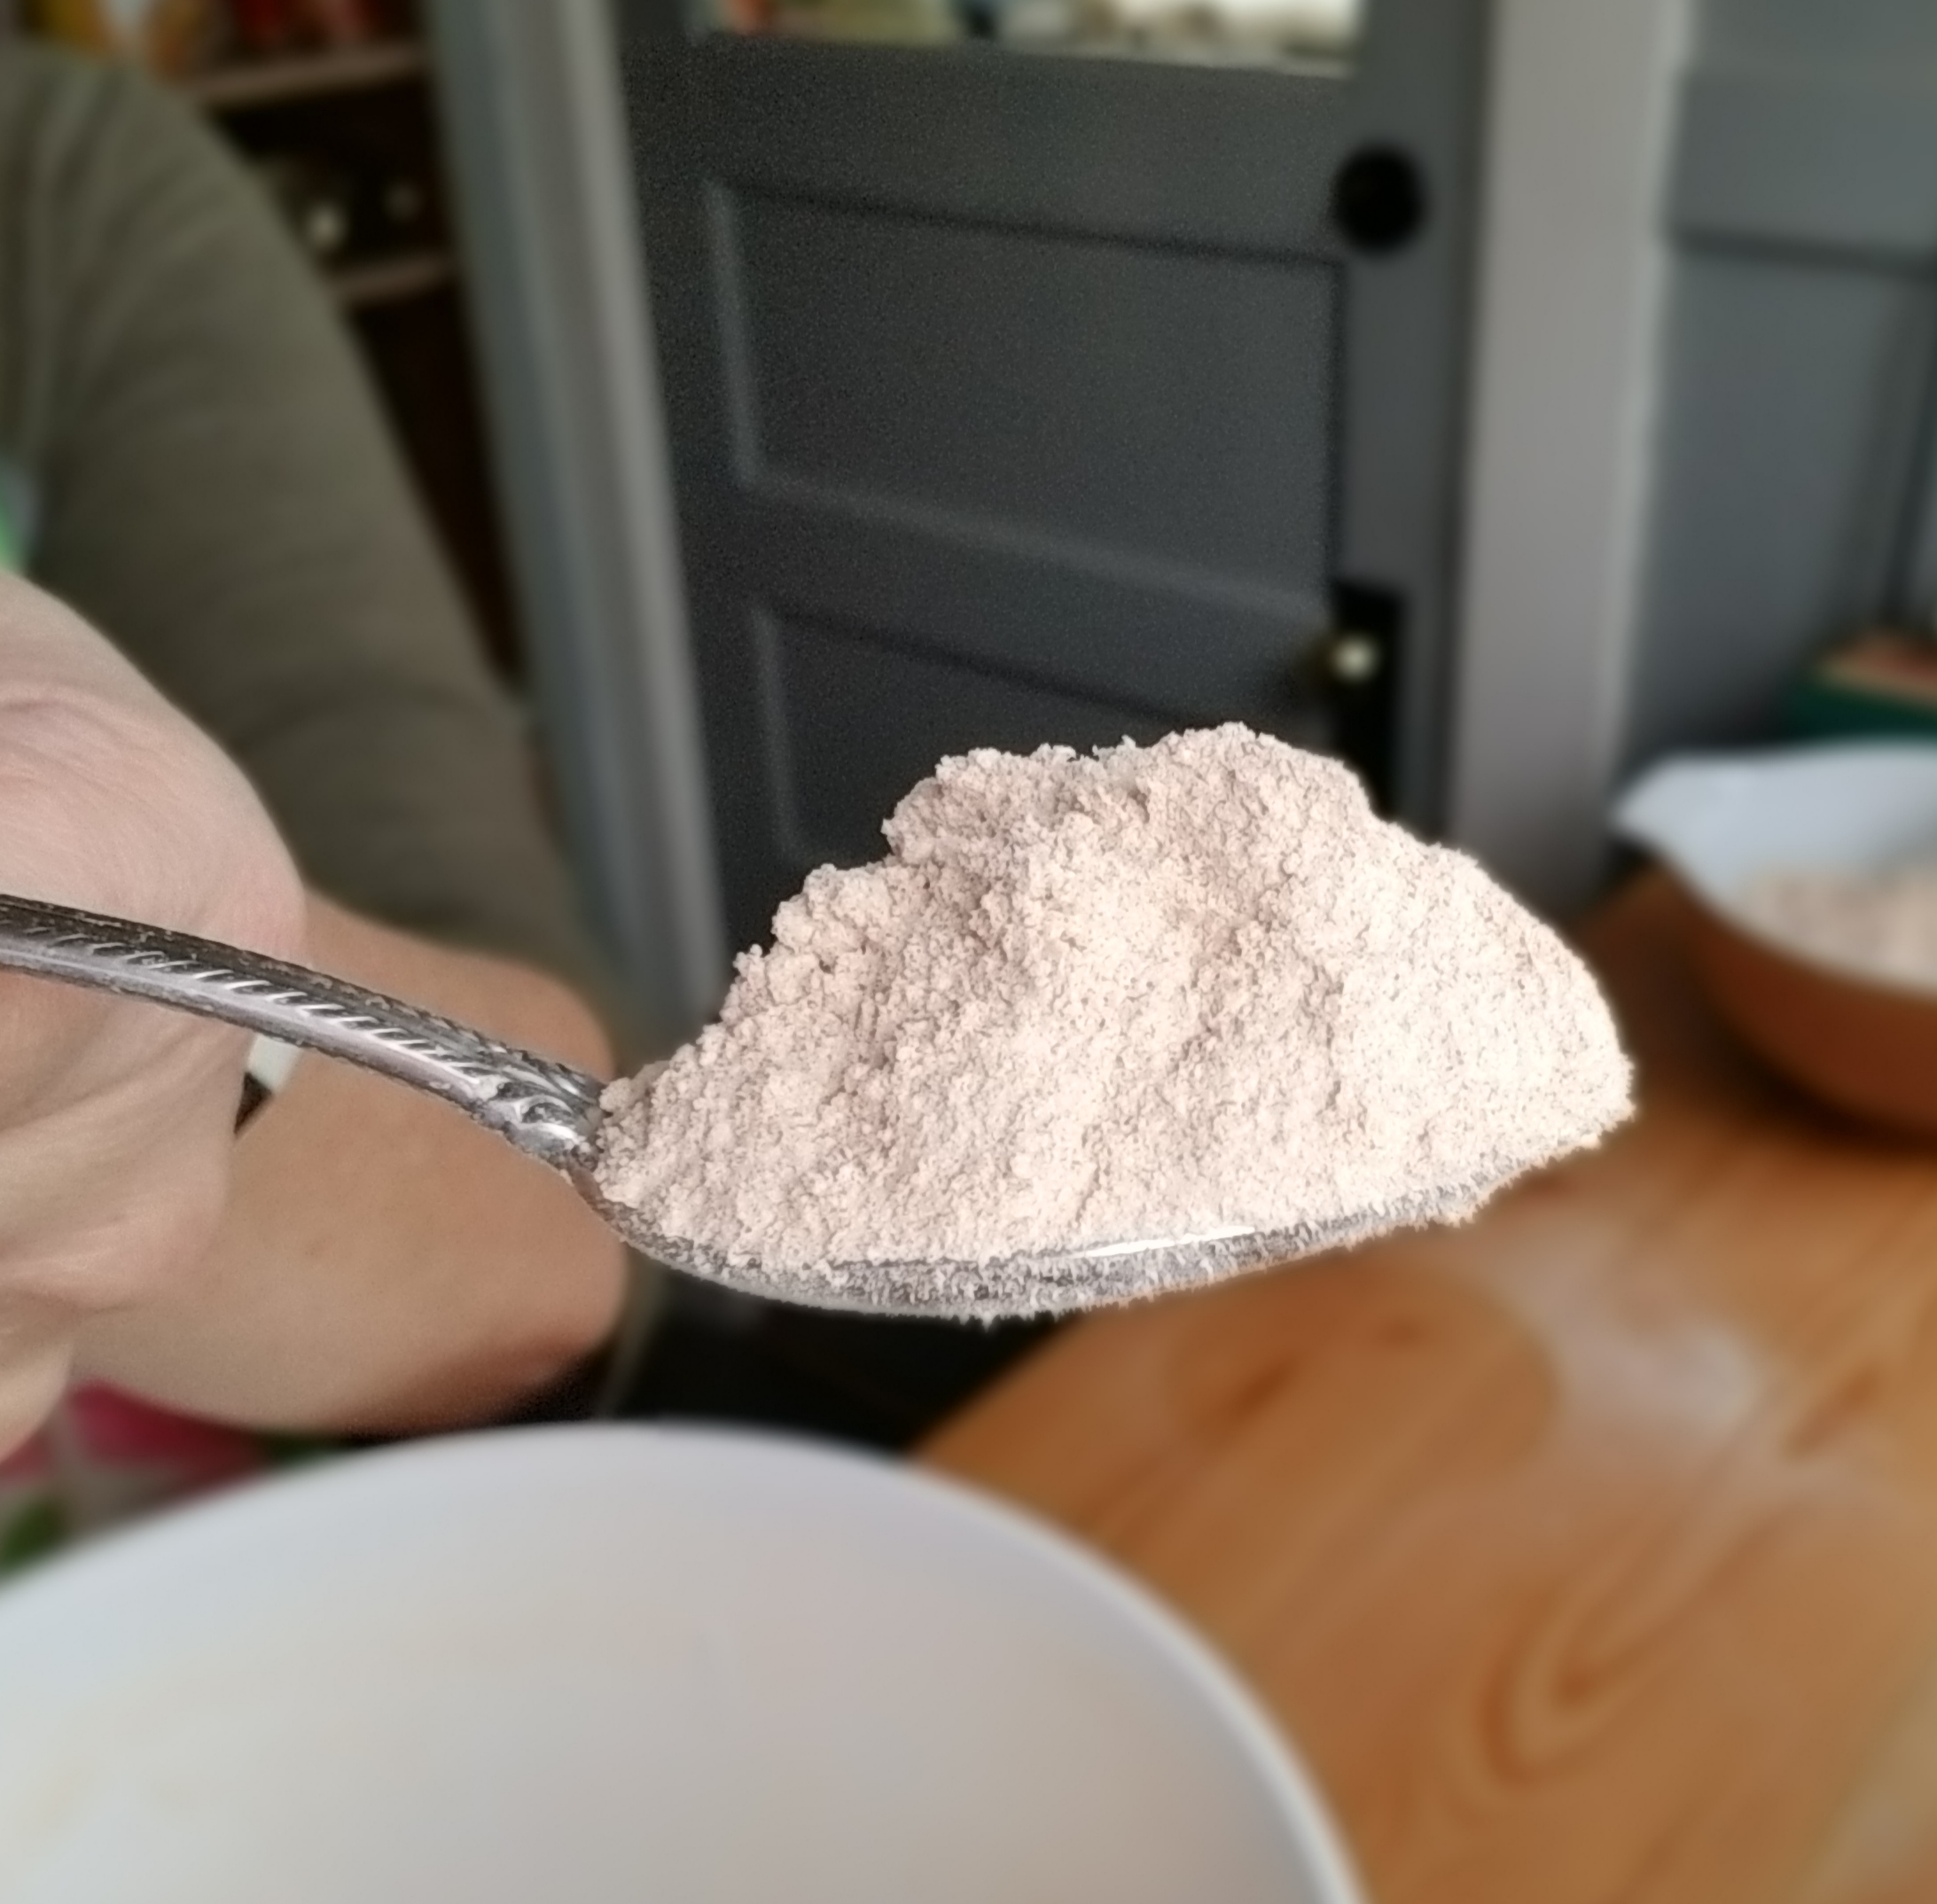 Sprouted Grain Flour!